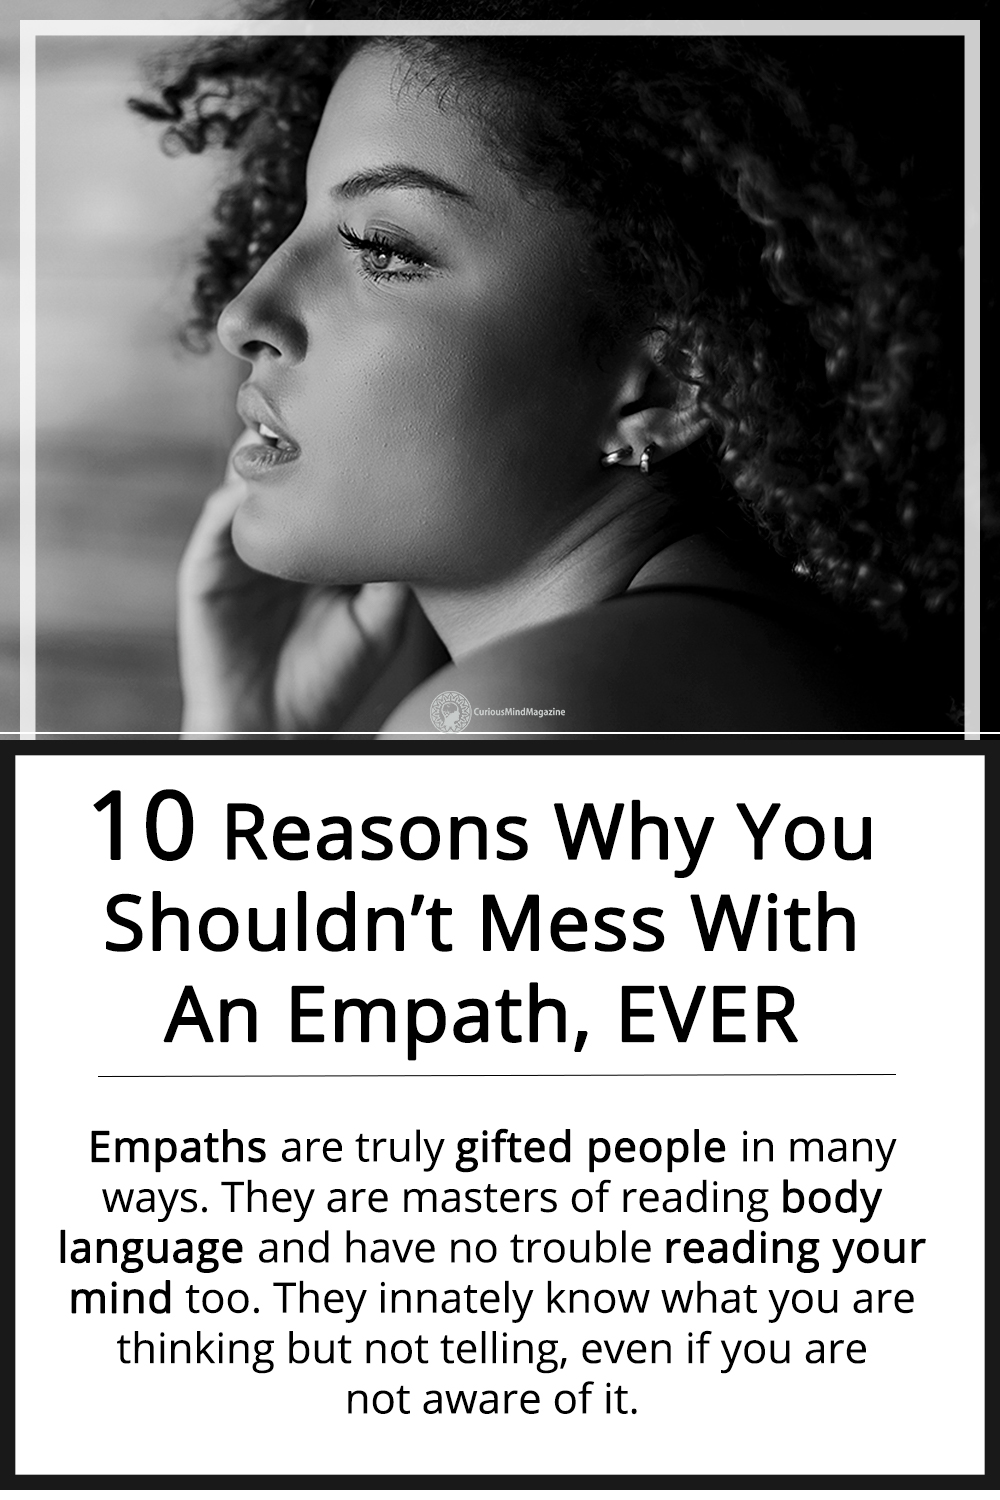 What Happens When An Empath Gets Angry?